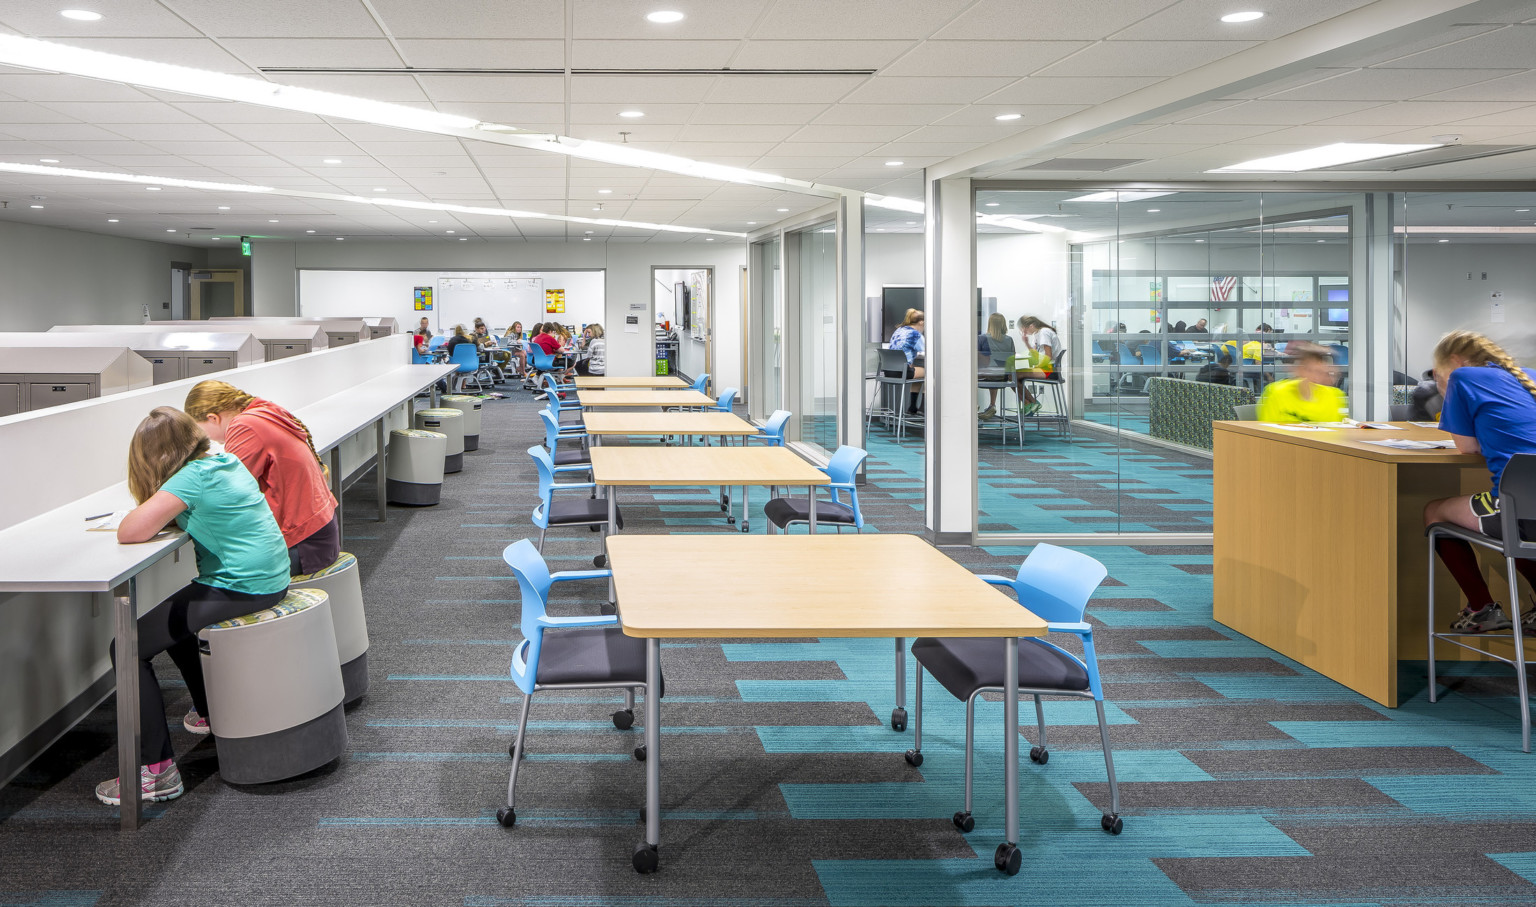 Long white room with white counter and stools, left. Tables with blue chairs, right. Glass walled learning spaces far right